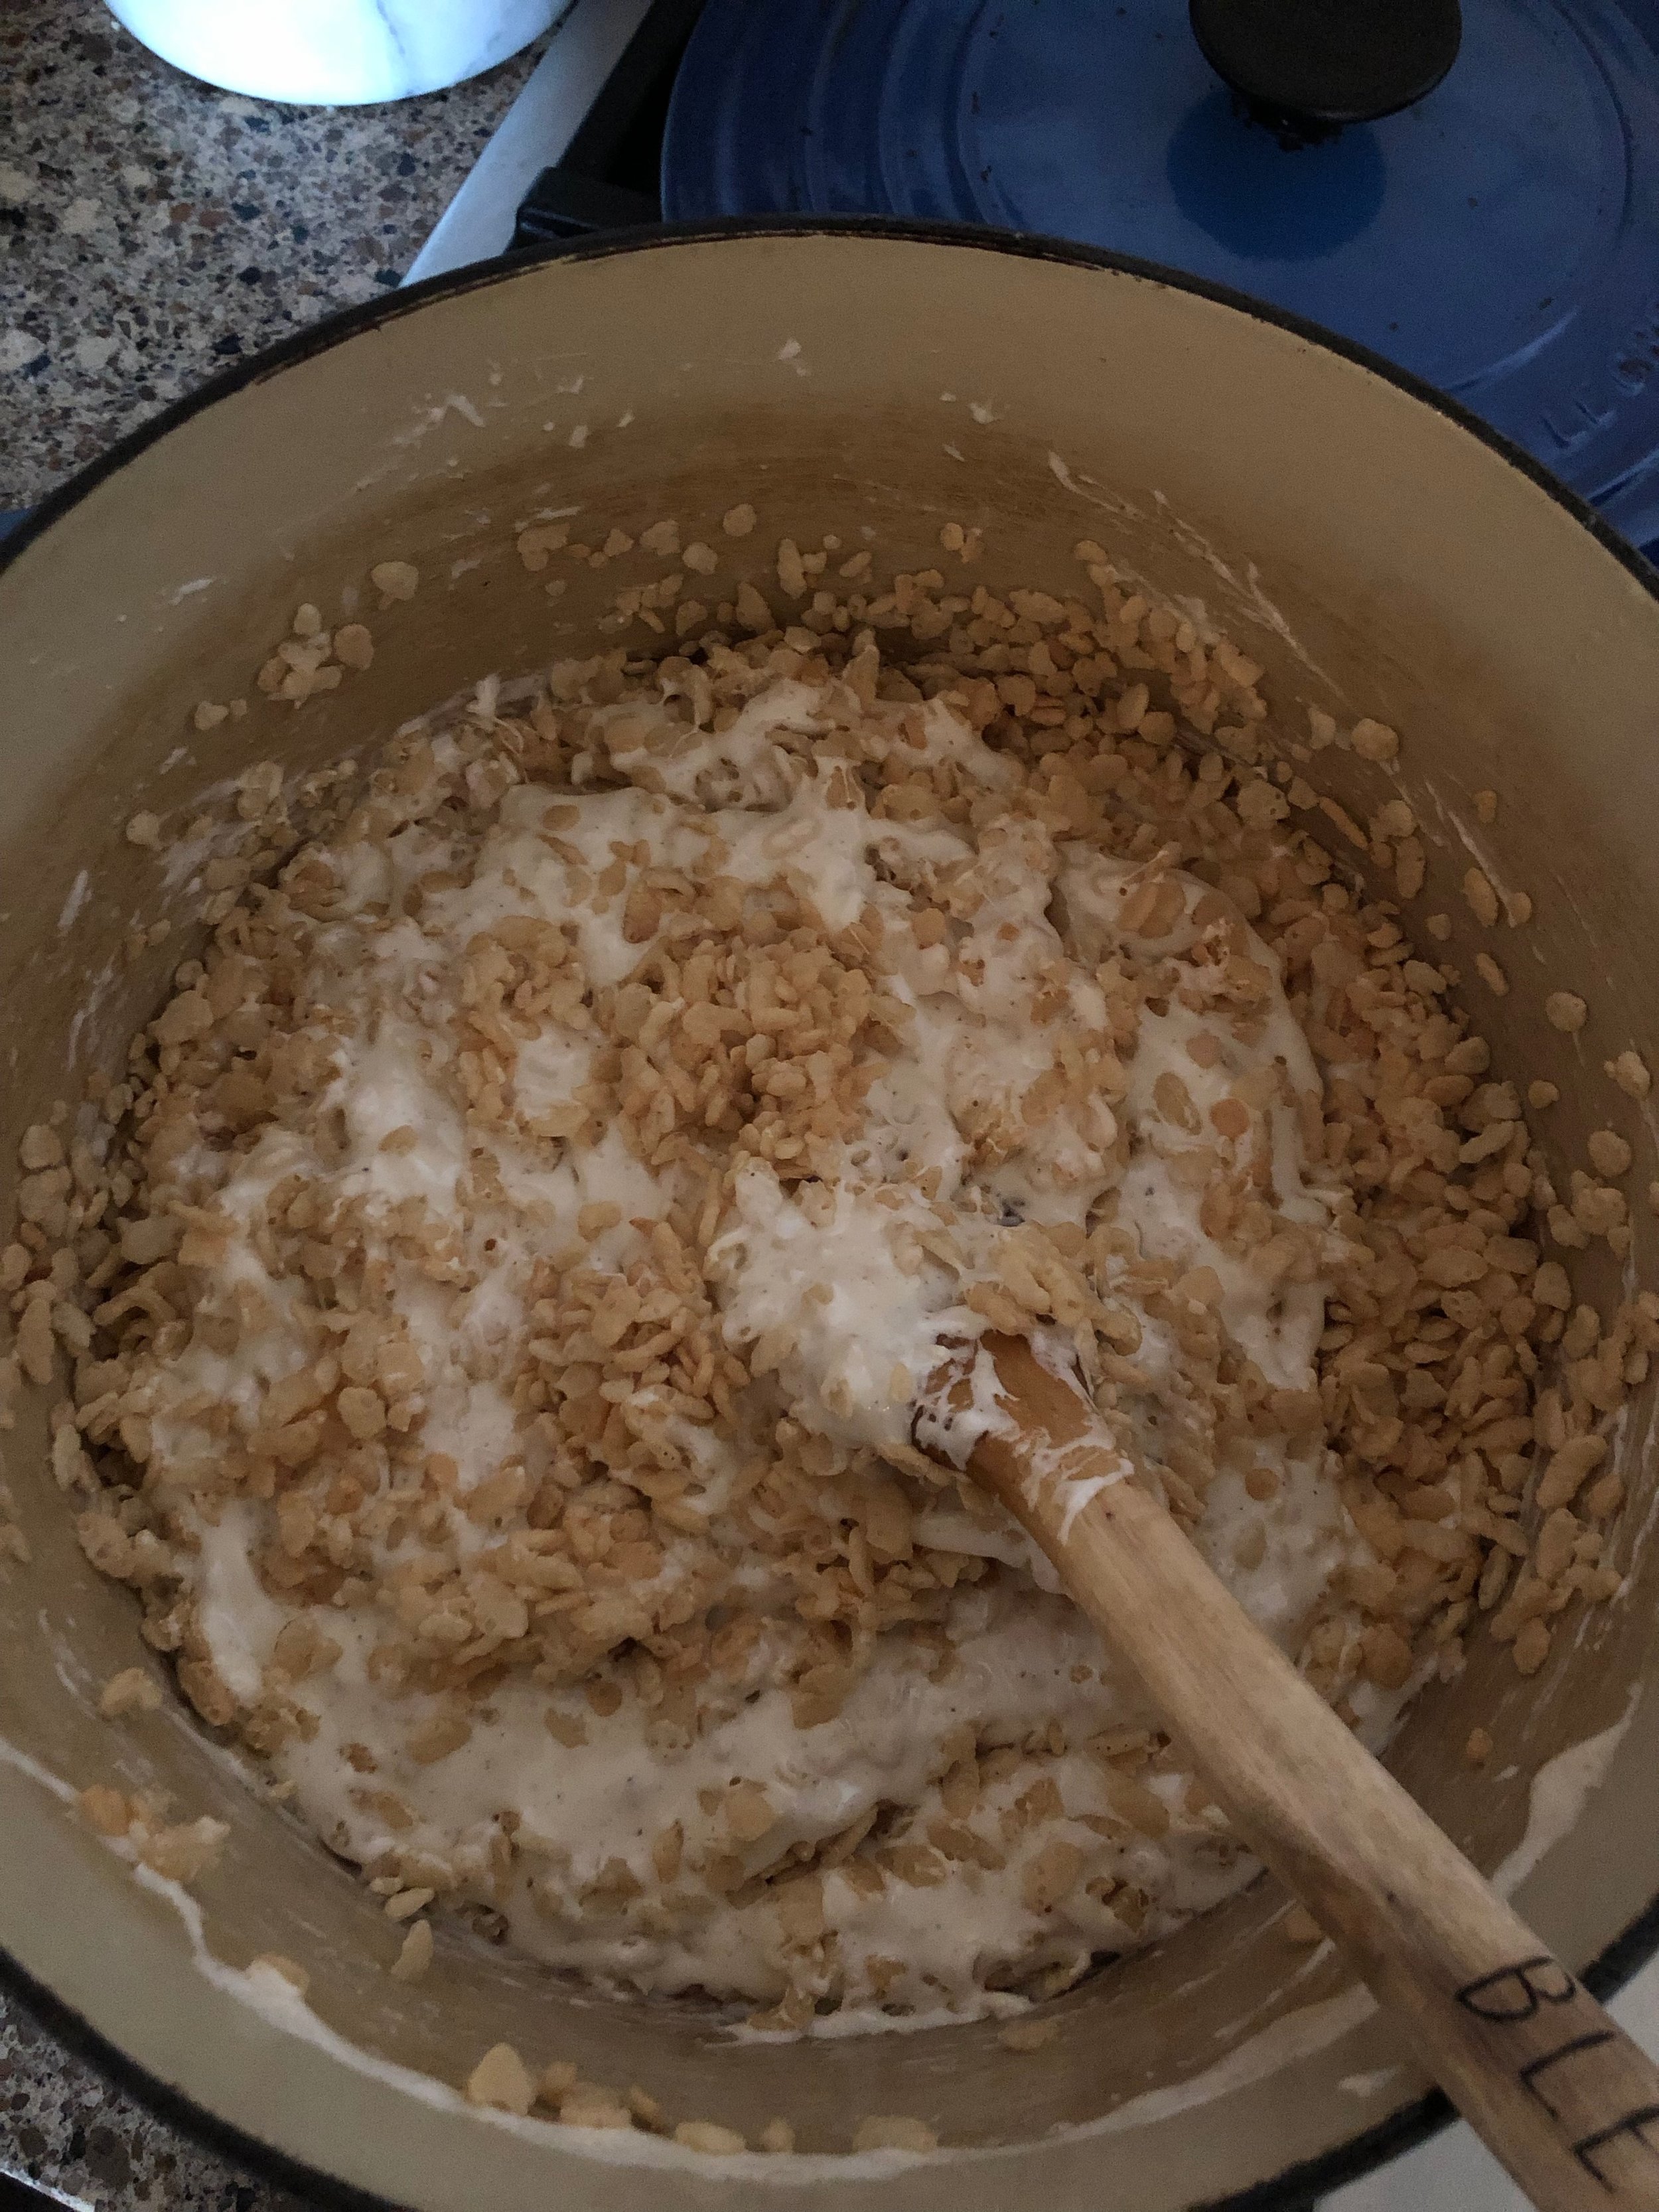 Gently folding the cereal into the brown butter marshmallow mixture